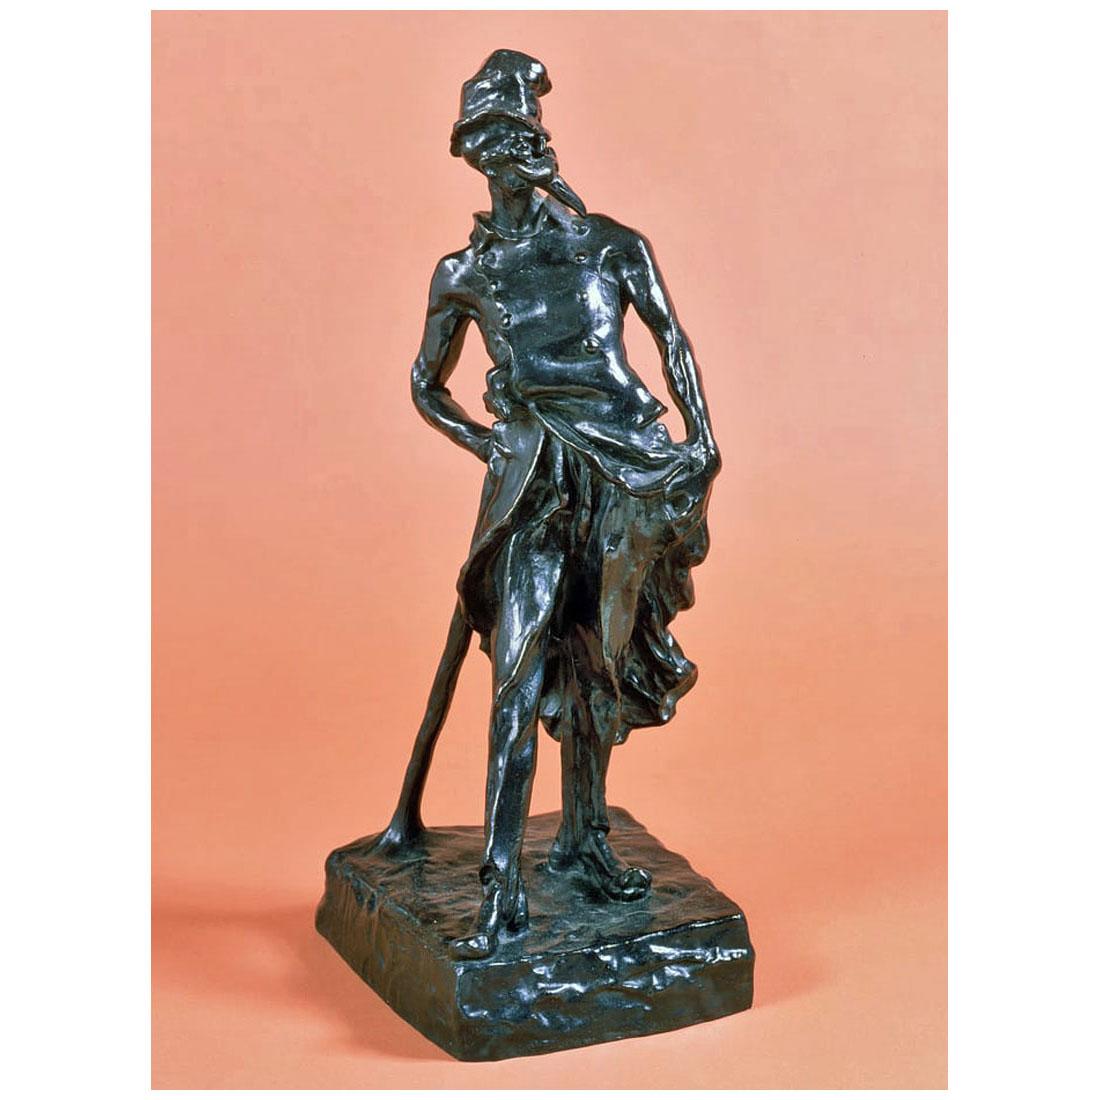 Honore Daumier. Ratapoil. Bronze, 1850. Musee d’Orsay